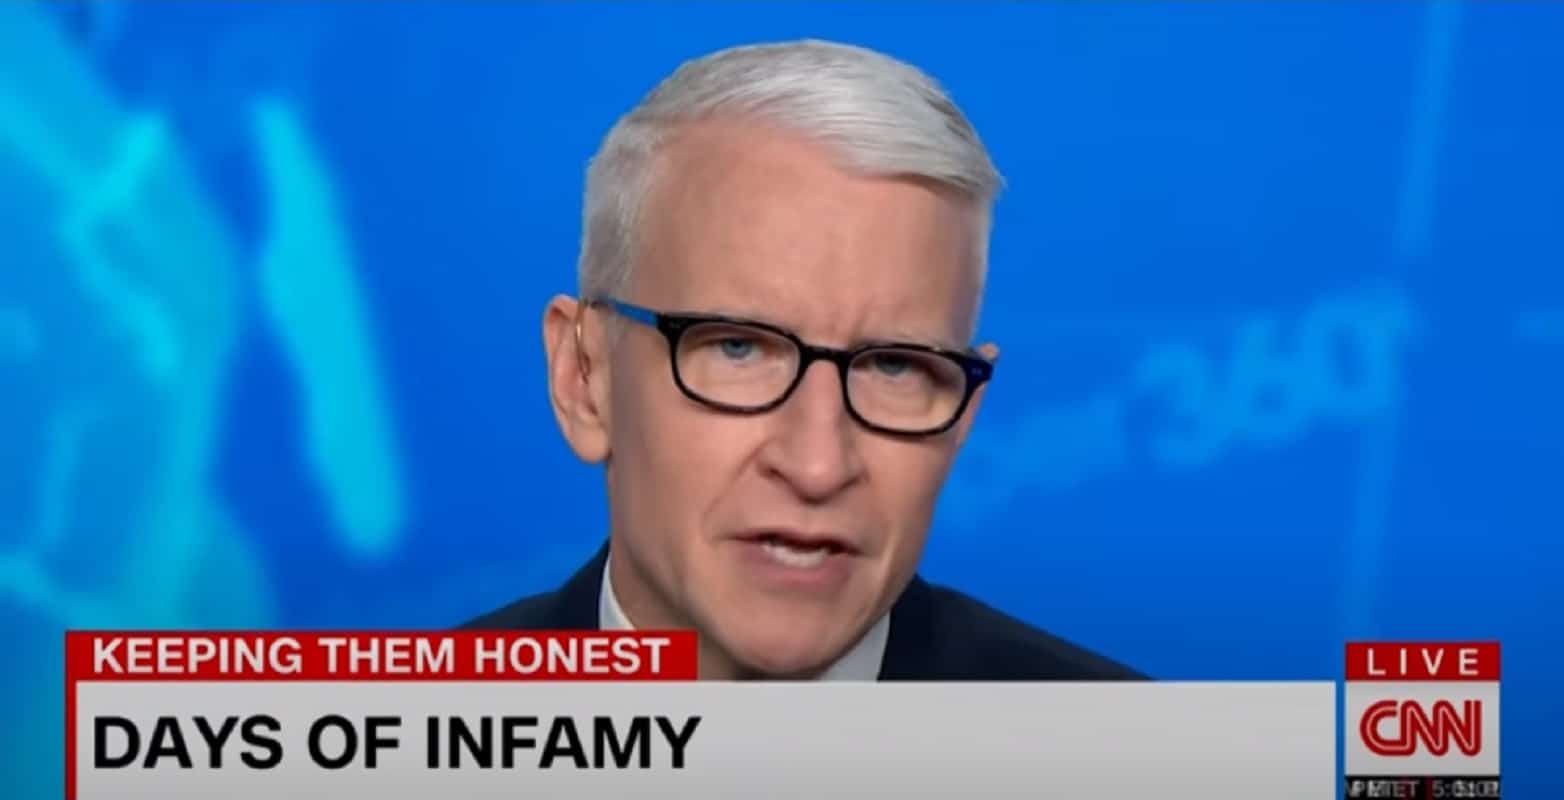 CNN anchor Anderson Cooper reflected on Pearl Harbour